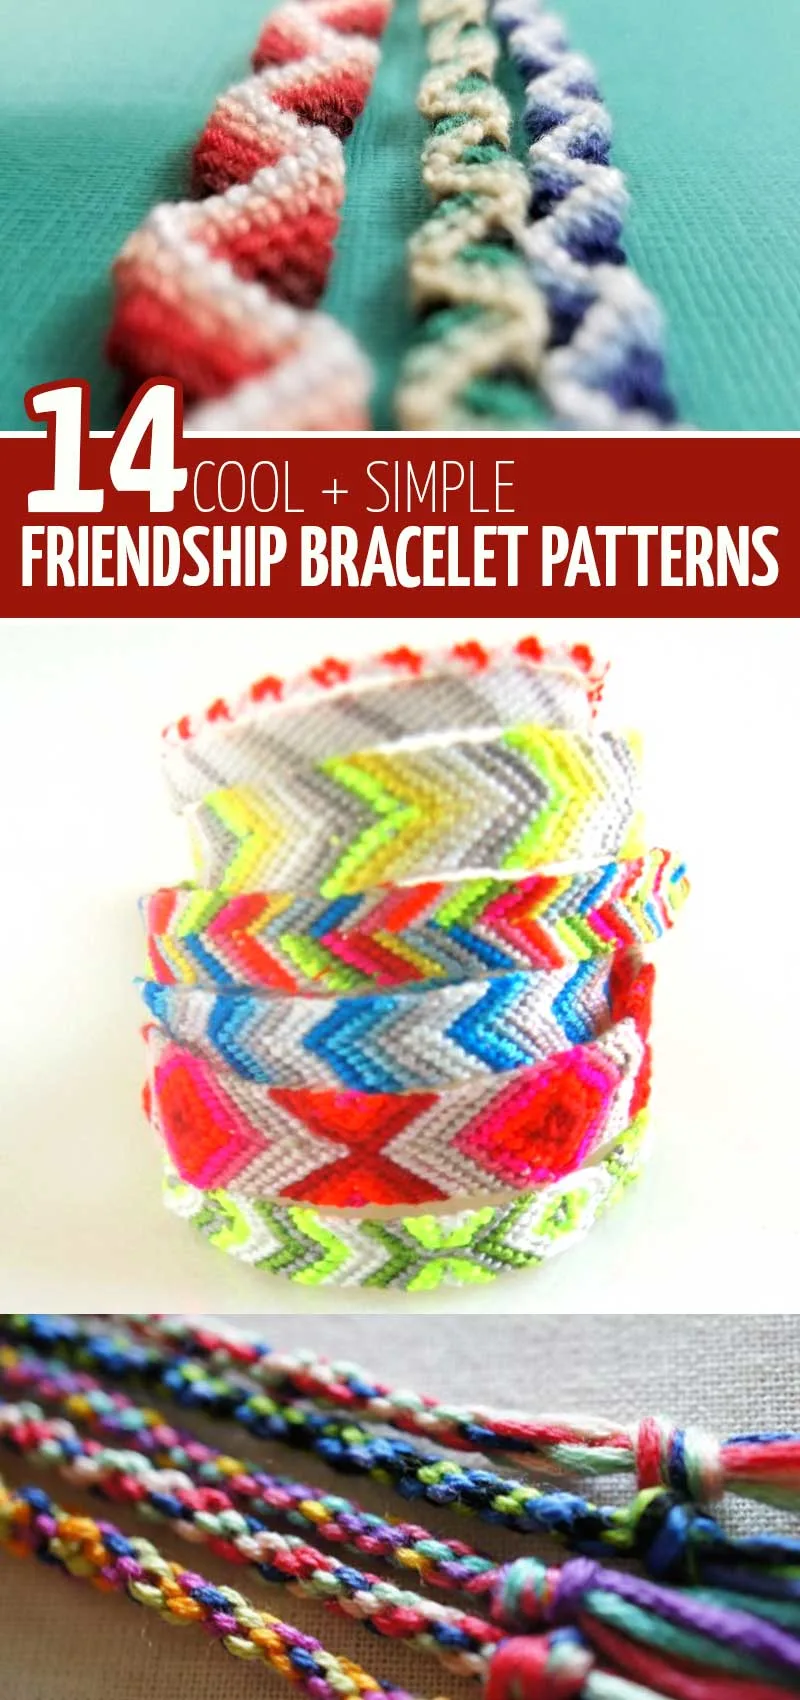 Click to find 14 cool diy friendship bracelets patterns and tutorials for teens, tweens, and adults, beginner and advanced, knotting and macrame bracelet tutorials and how to make friendship bracelet with beads and more unique materials